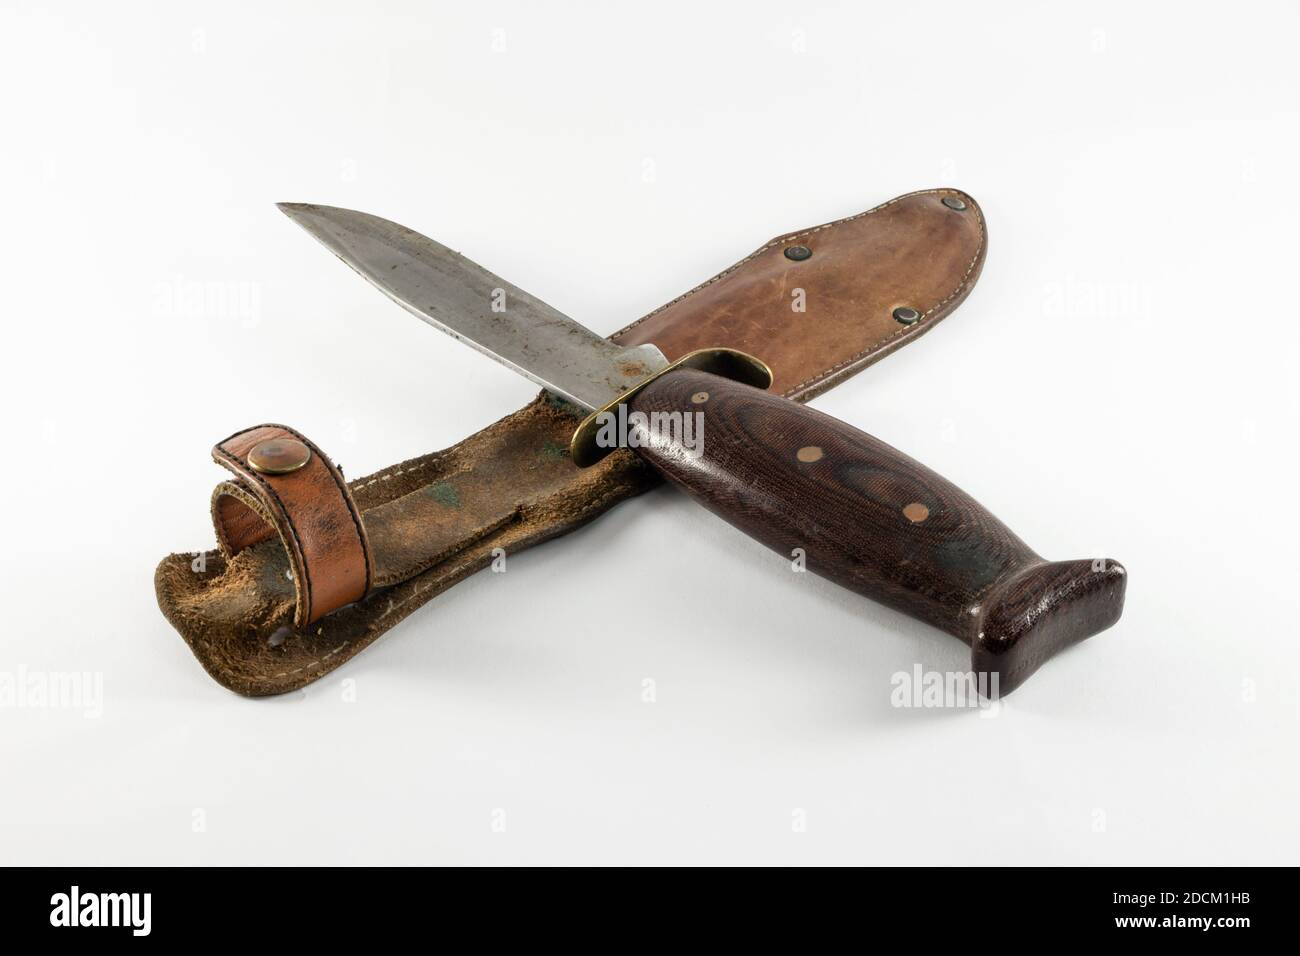 Old rusty vintage hunting bushcraft knife with leather sheath. Isolated on white background, copy space. Stock Photo